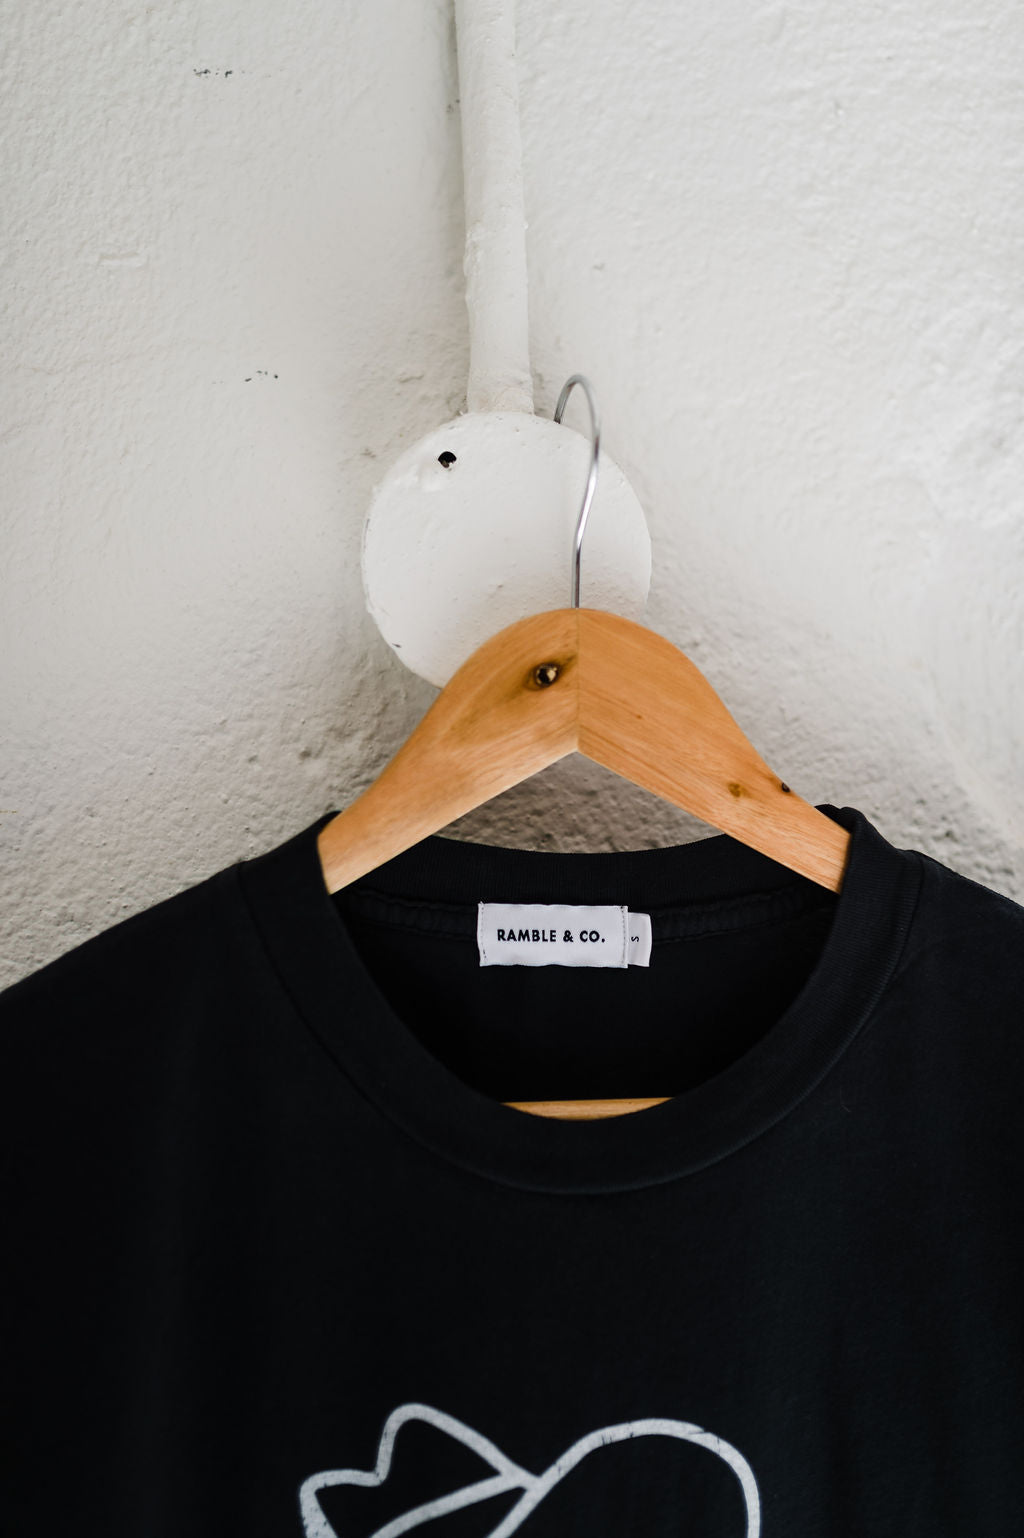 have a nice day | vintage black ramble original relaxed tee